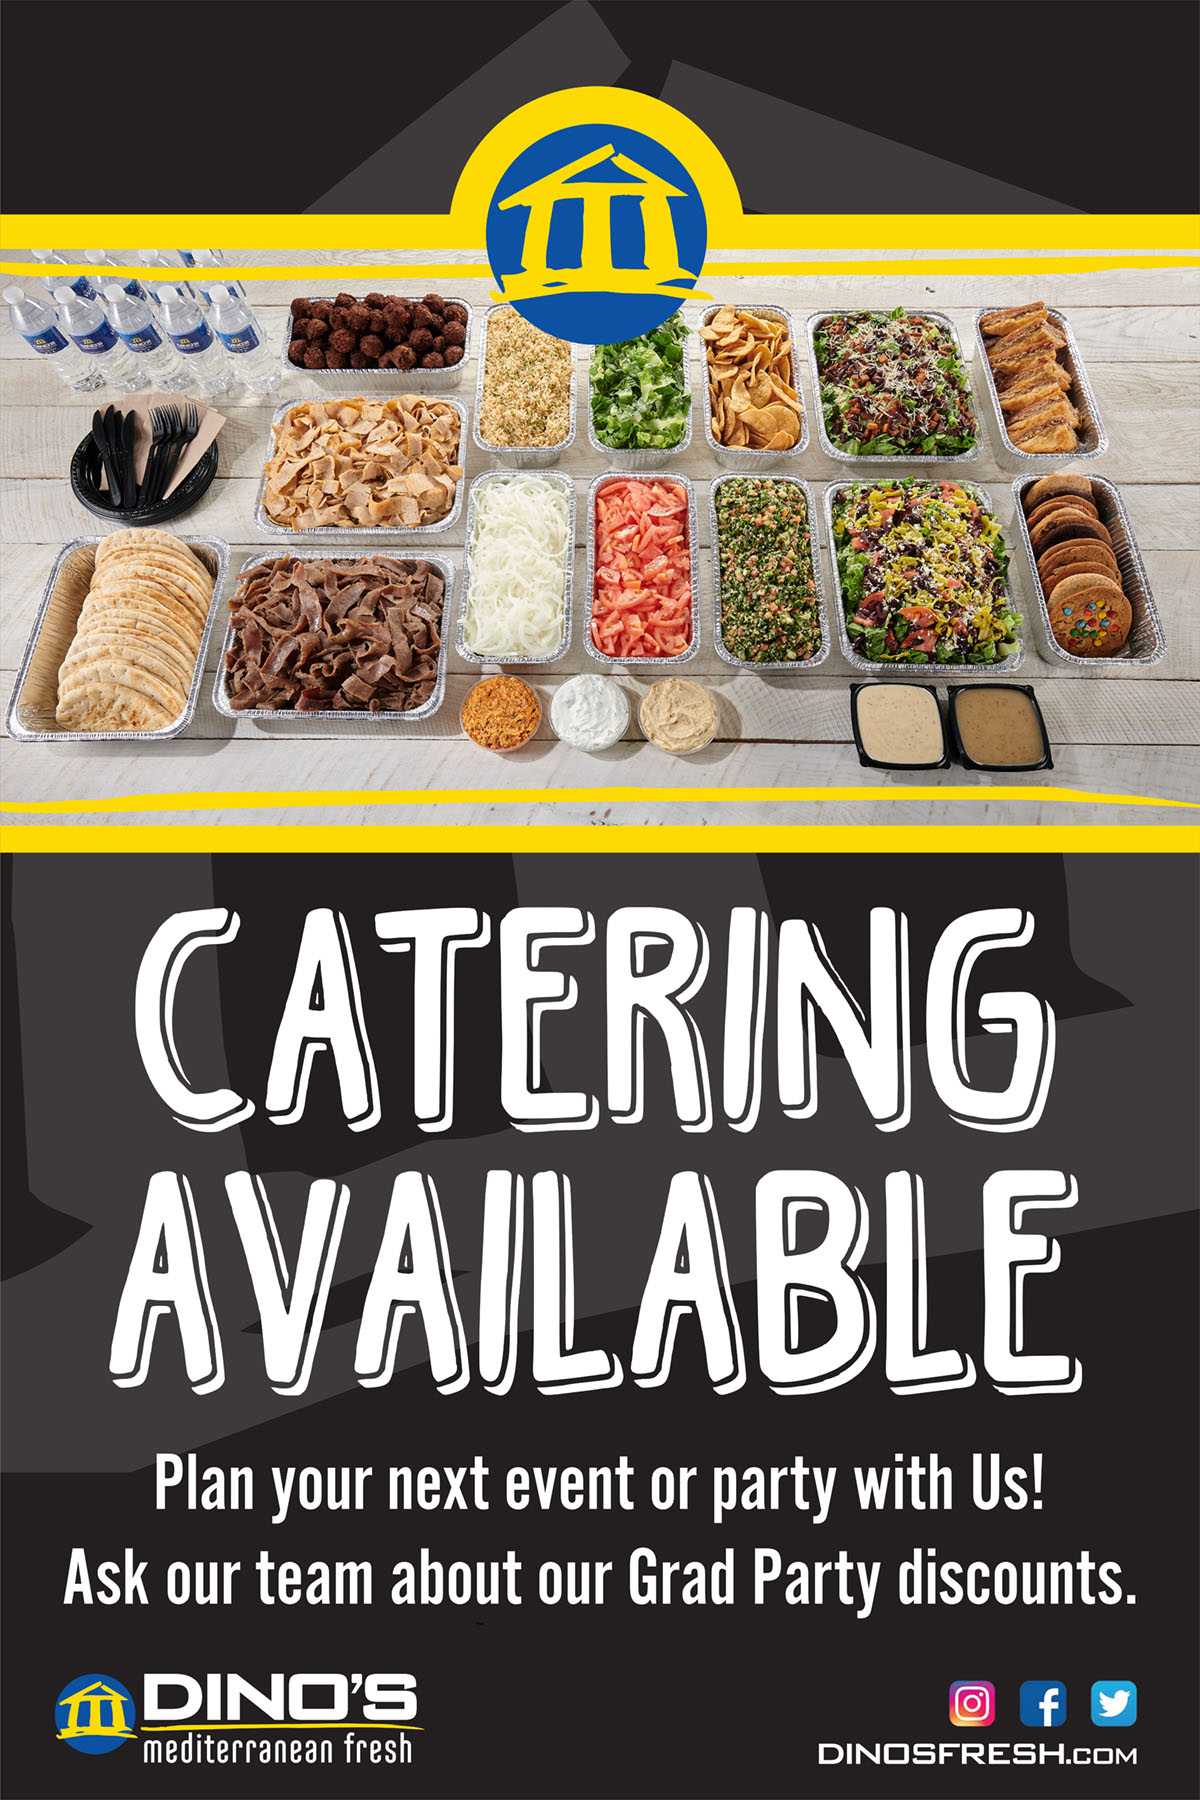 Catering Available: Plan your next party with us! Ask our team about our grad party discounts.